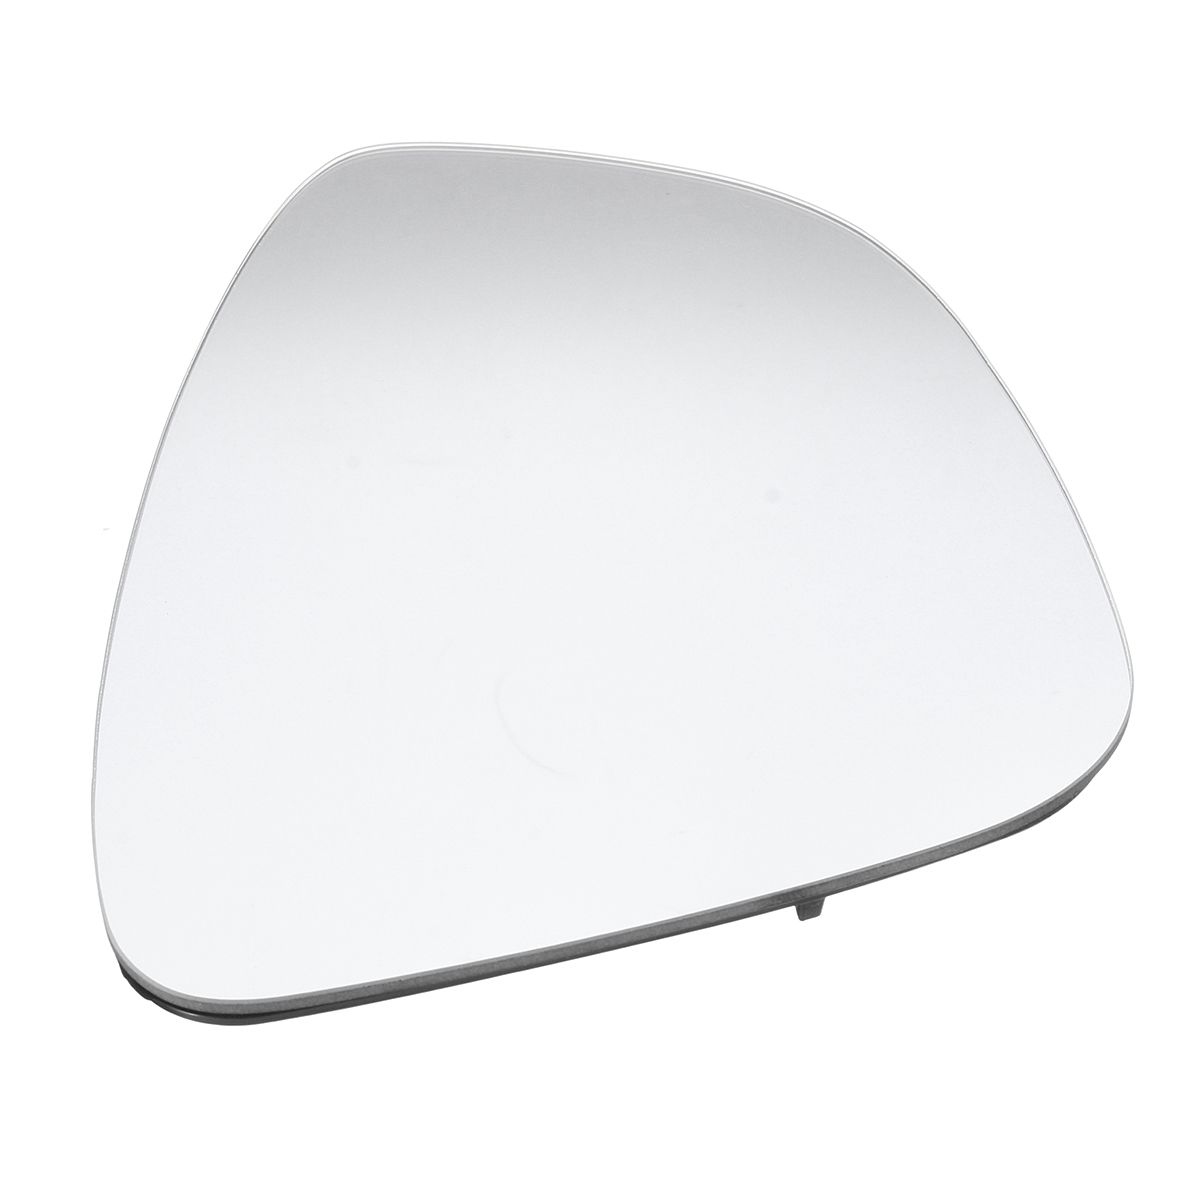 Car-Right-Side-Exterior-Wing-Mirror-Glass-Rear-View-WHeating-For-VW-PASSAT-CC-EOS-1141512